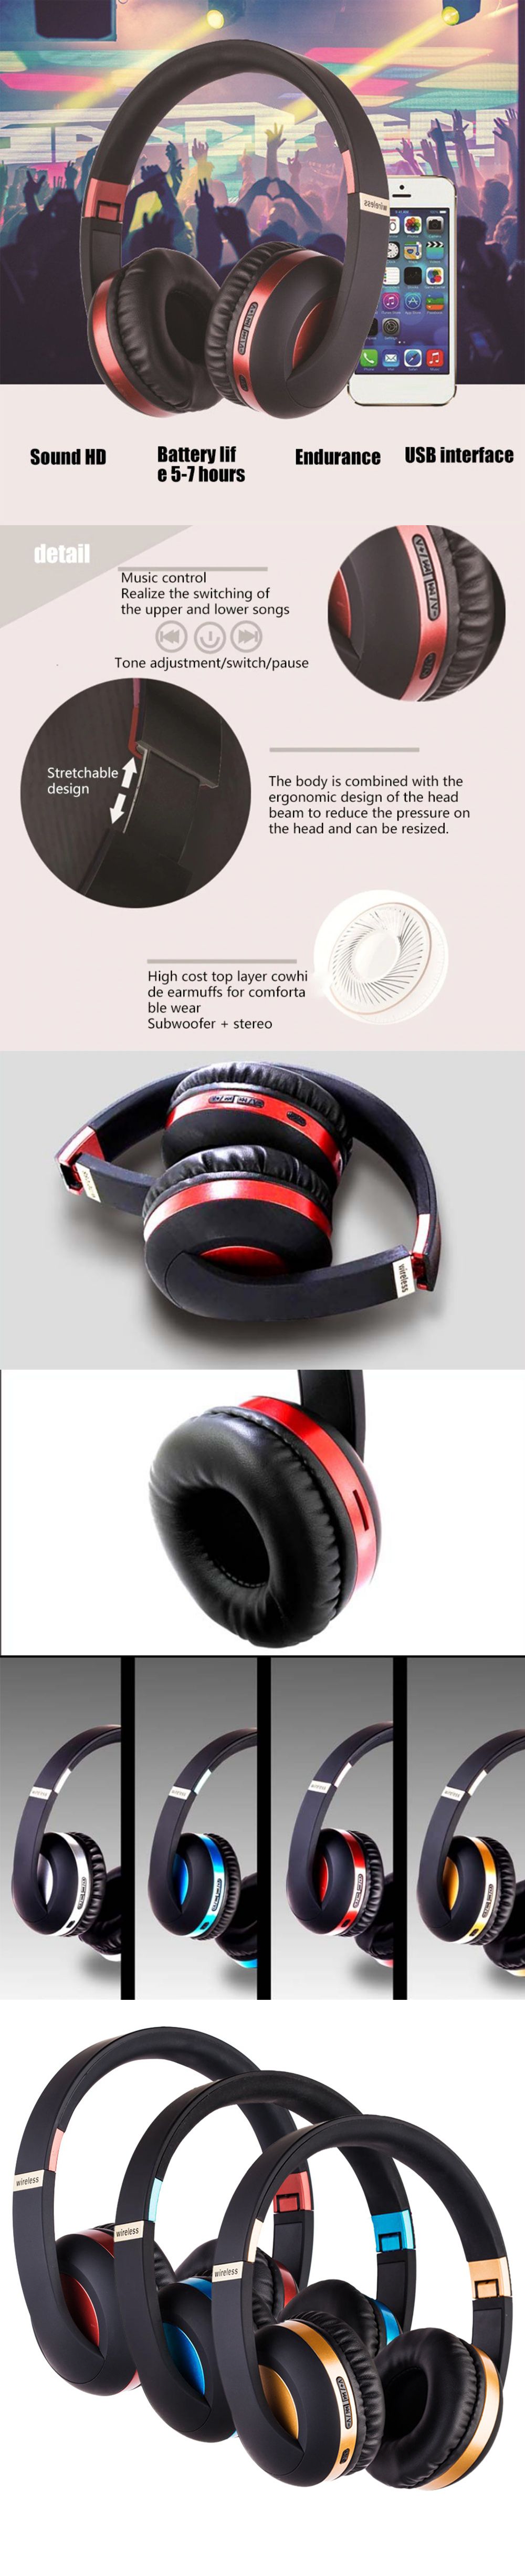 MH4-USB-Wired--bluetooth50-Wireless-24GHz-Headphone-Omnidirectional-Stereo-Headset-with-Mic-for-PS4--1575575